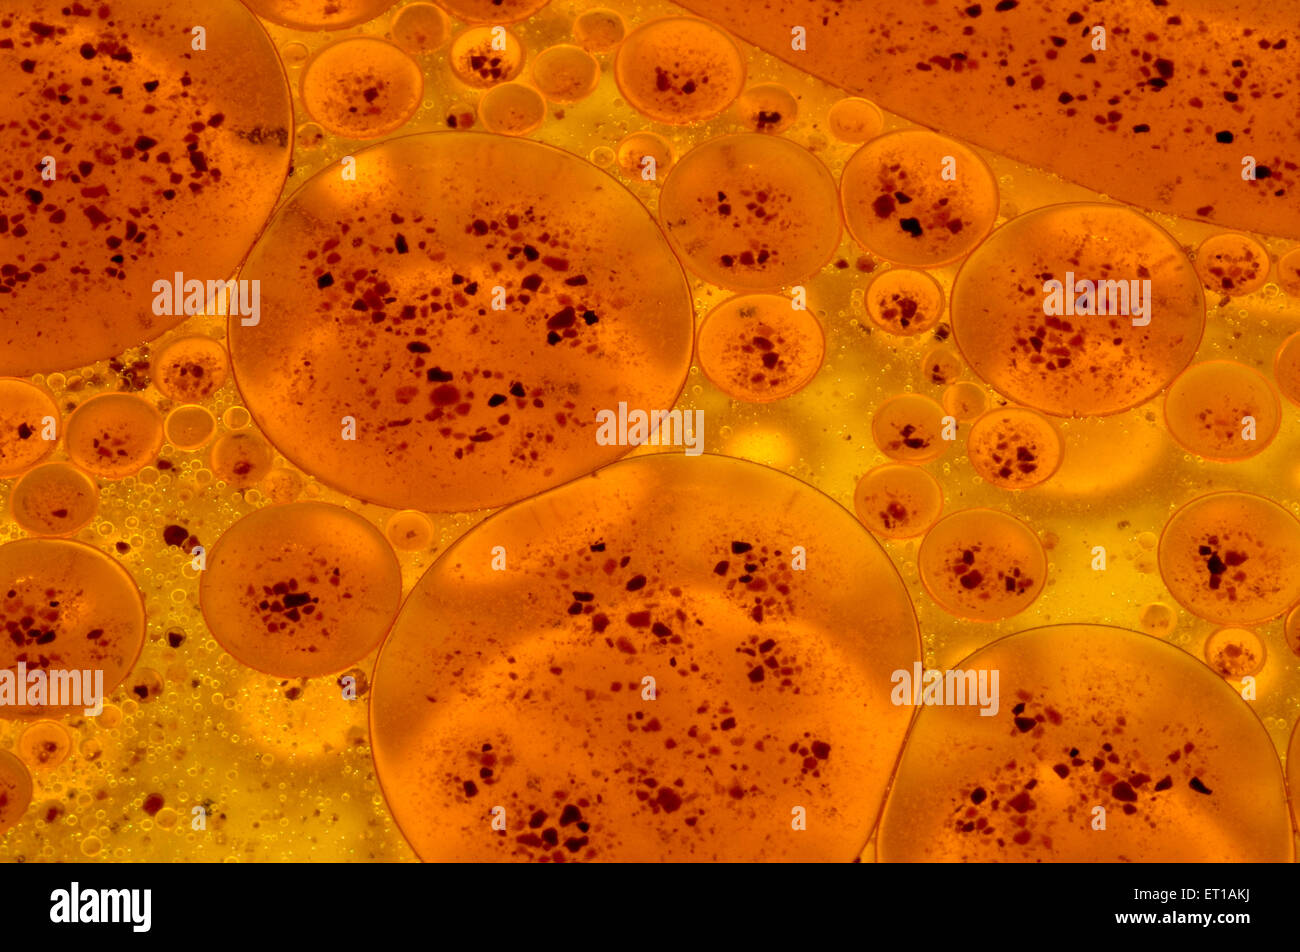 oil water abstract pattern background Stock Photo